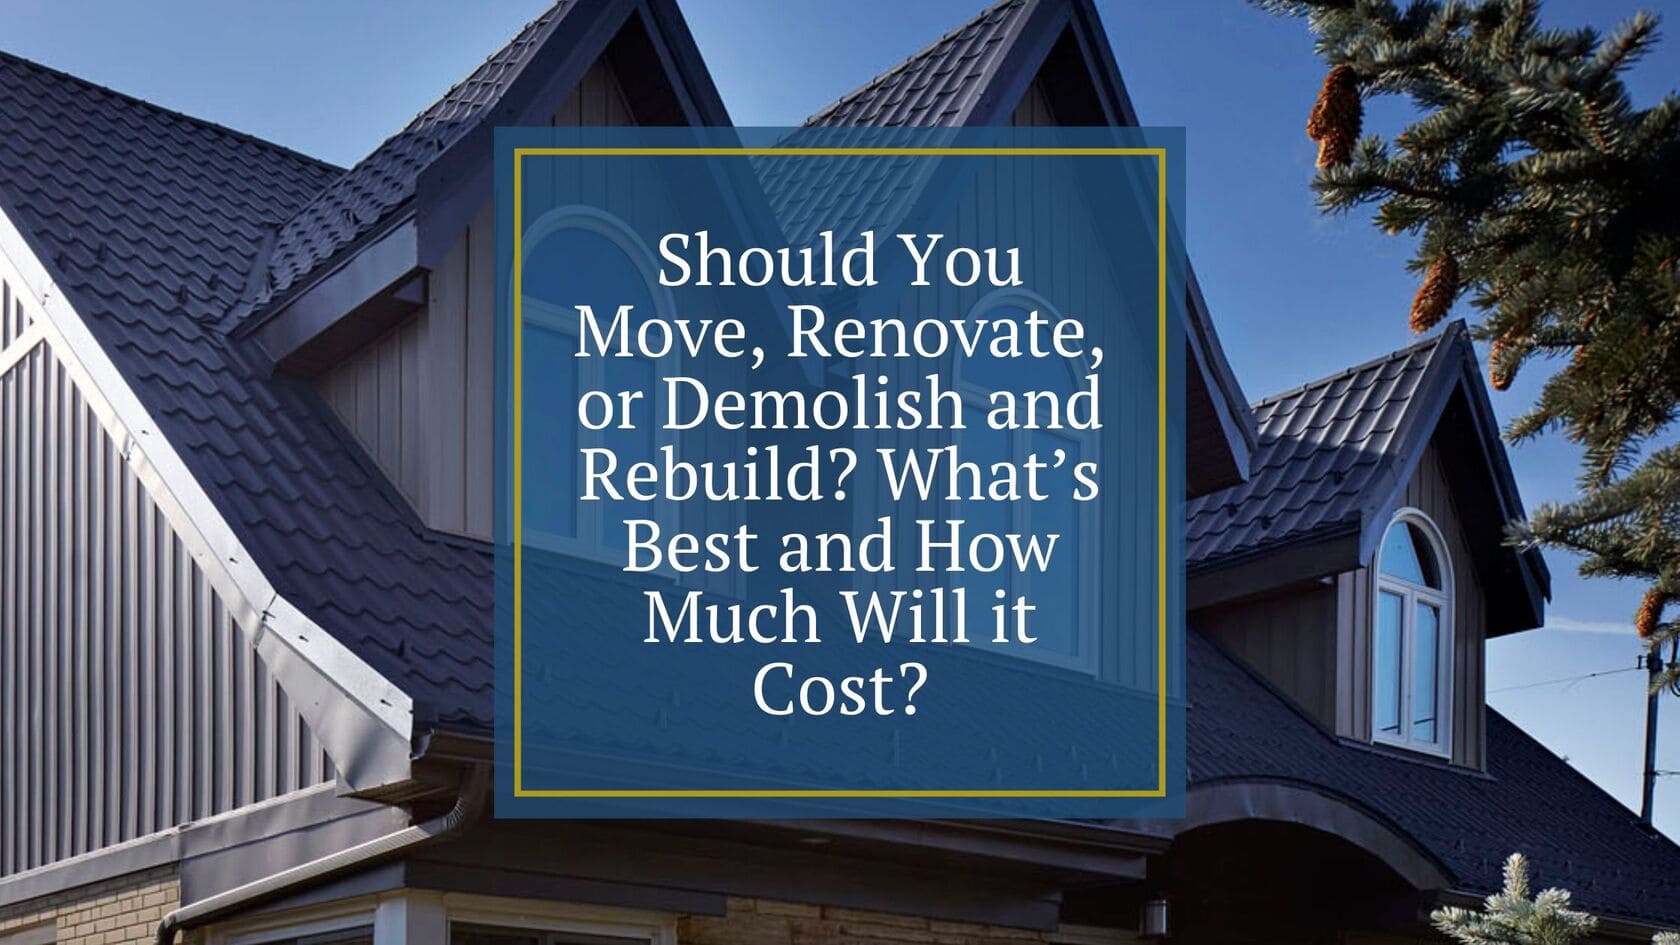 Should You Move, Renovate, or Demolish and Rebuild? What’s Best and How Much Will it Cost?